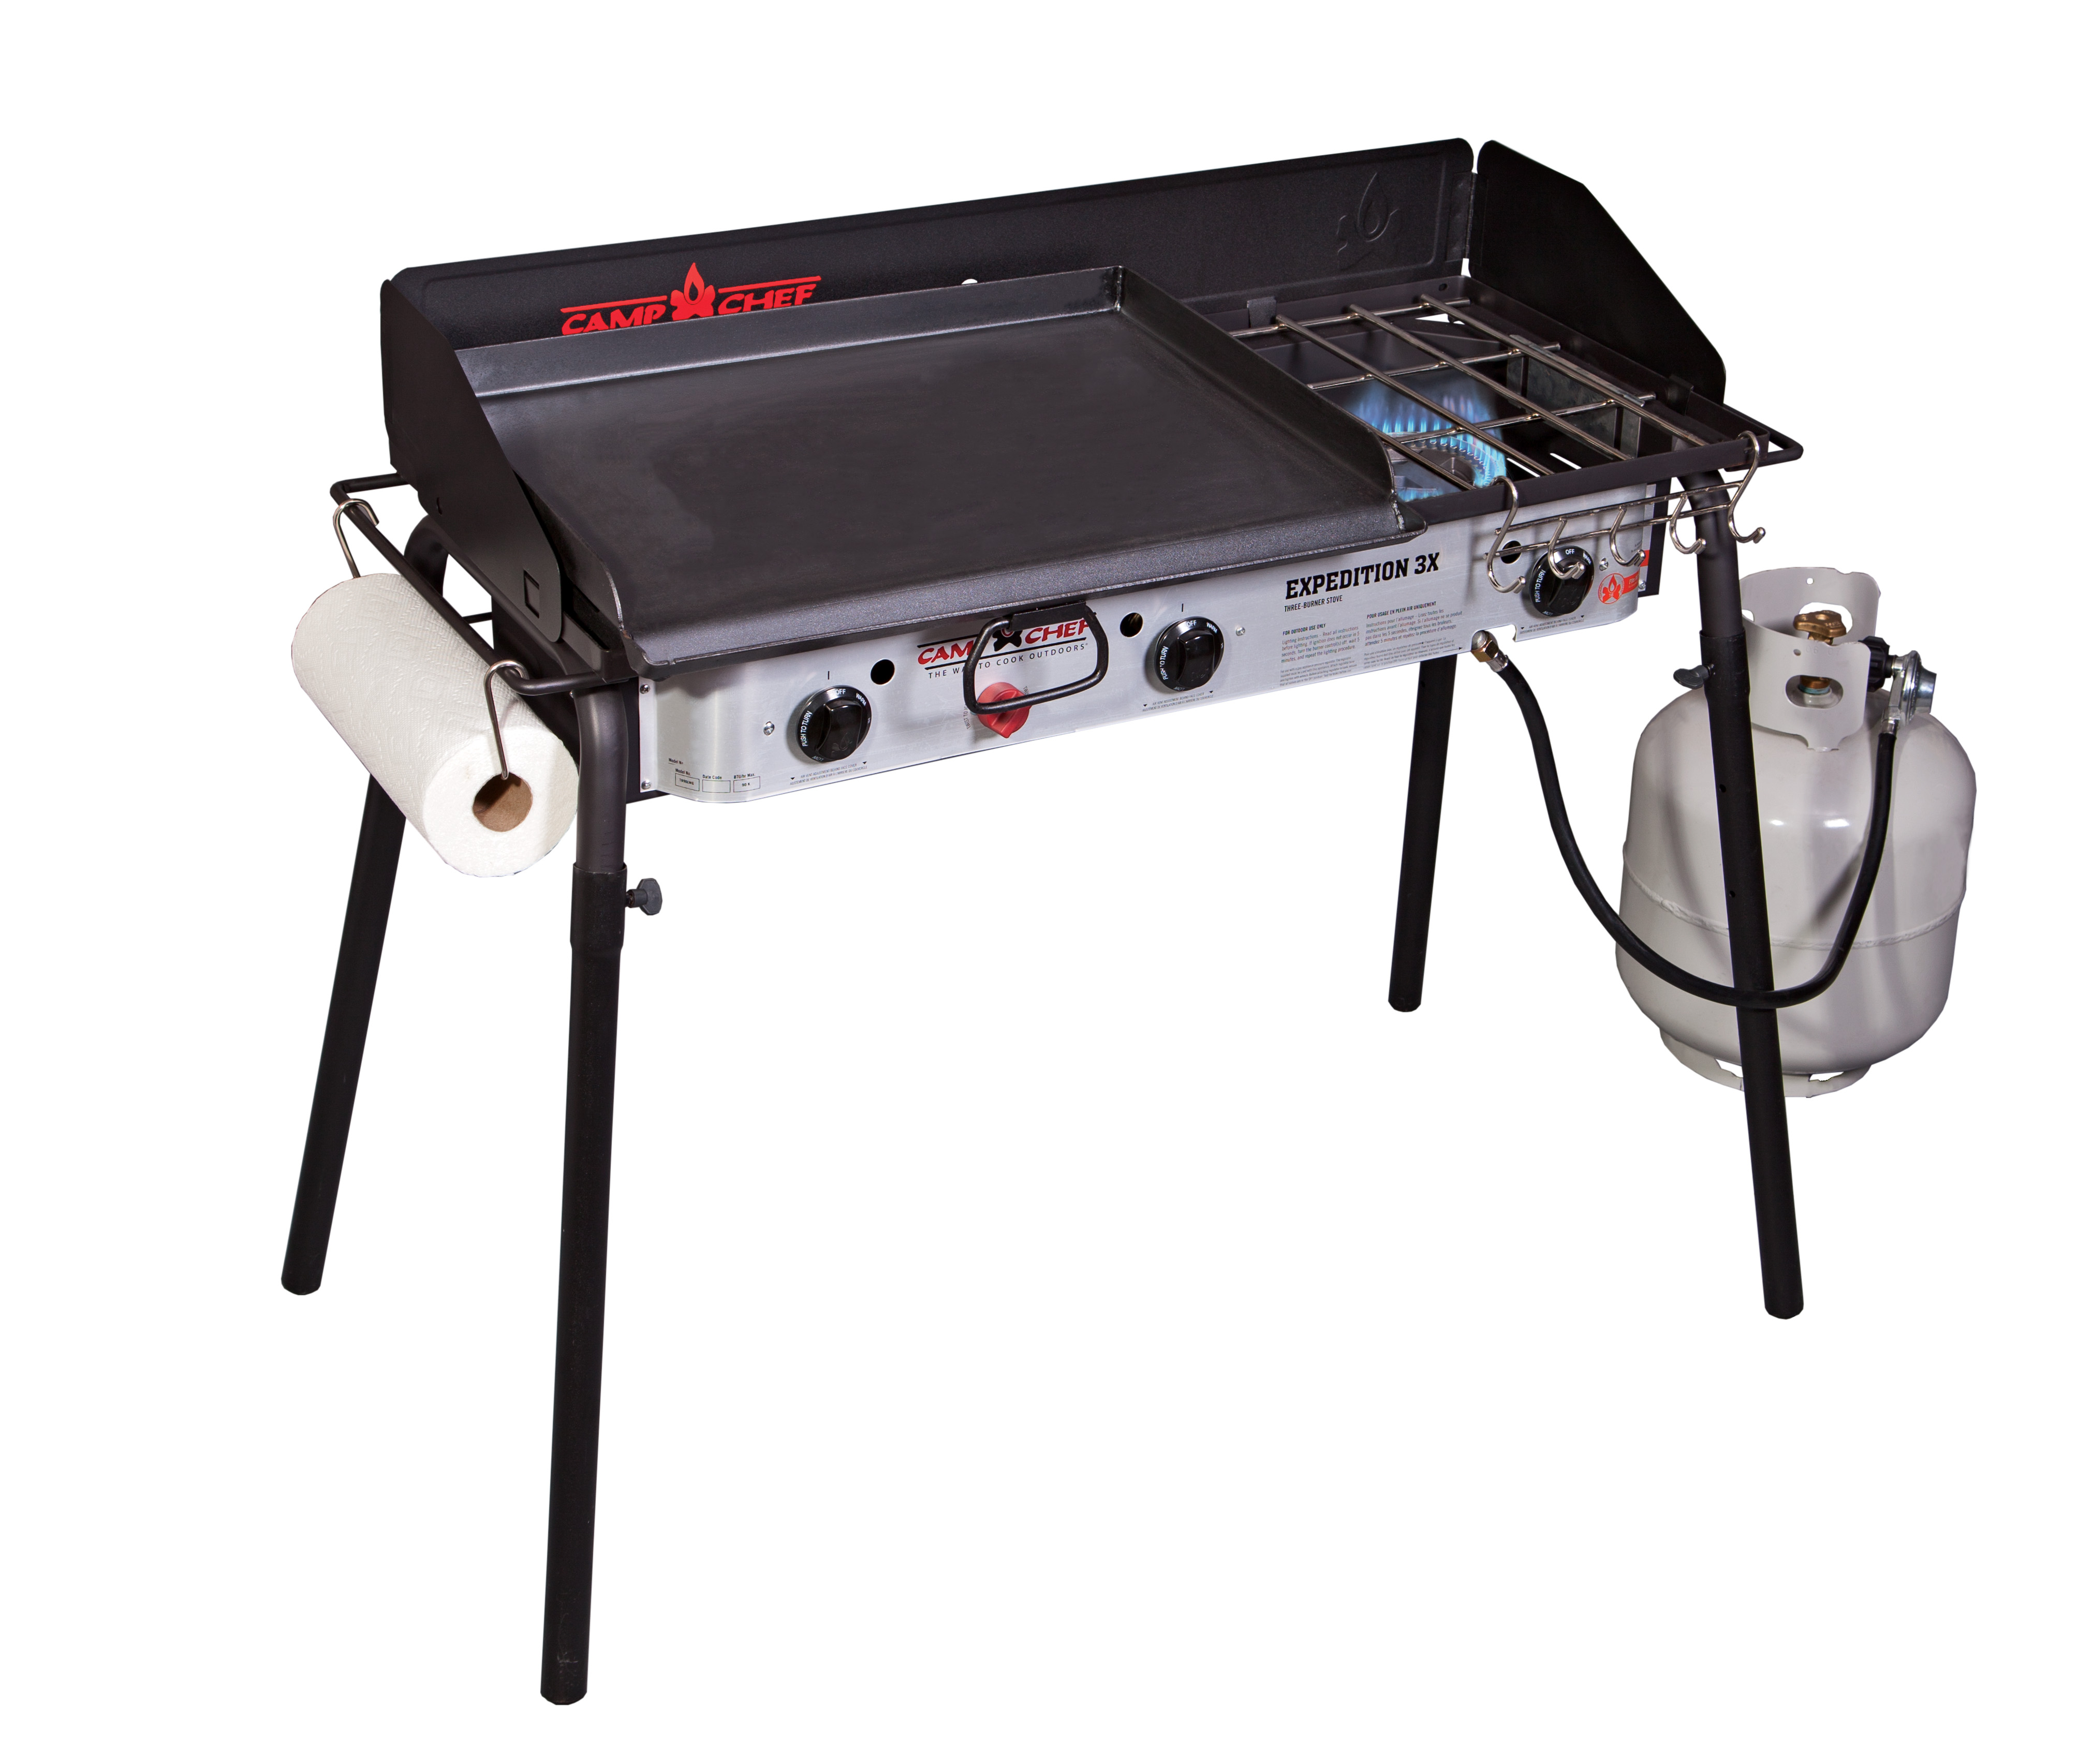 Camp Chef Expedition 3X Stove with 18"x24" Griddle - 3 Burners at 30,000 BTUs Each, TB90LWG - image 1 of 13